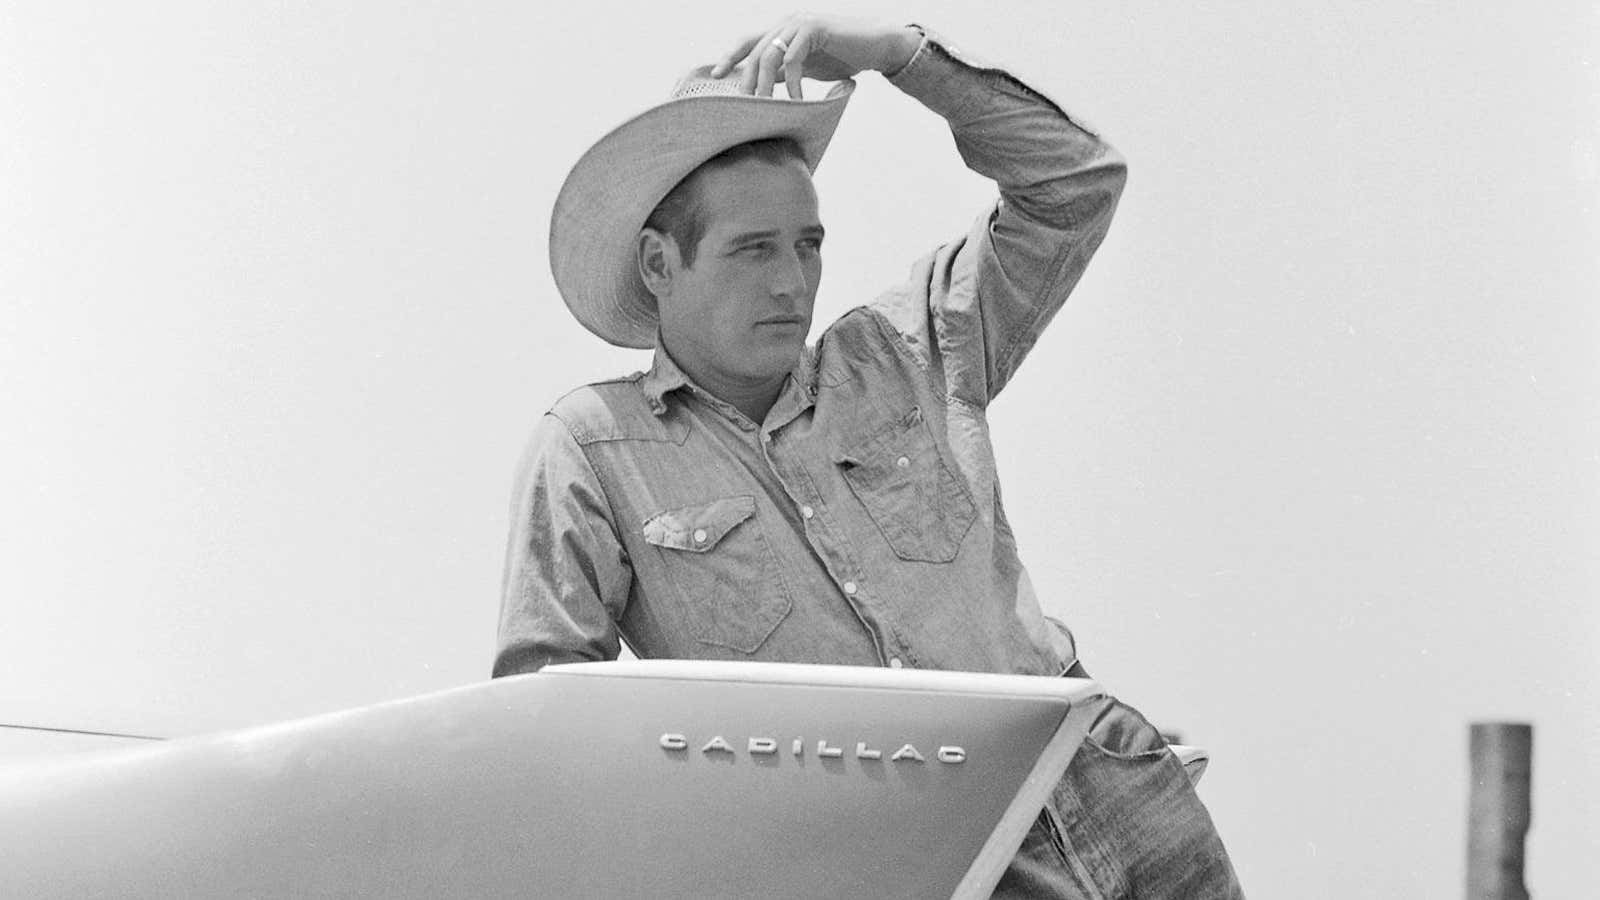 Cadillac: Once as sexy as Paul Newman.